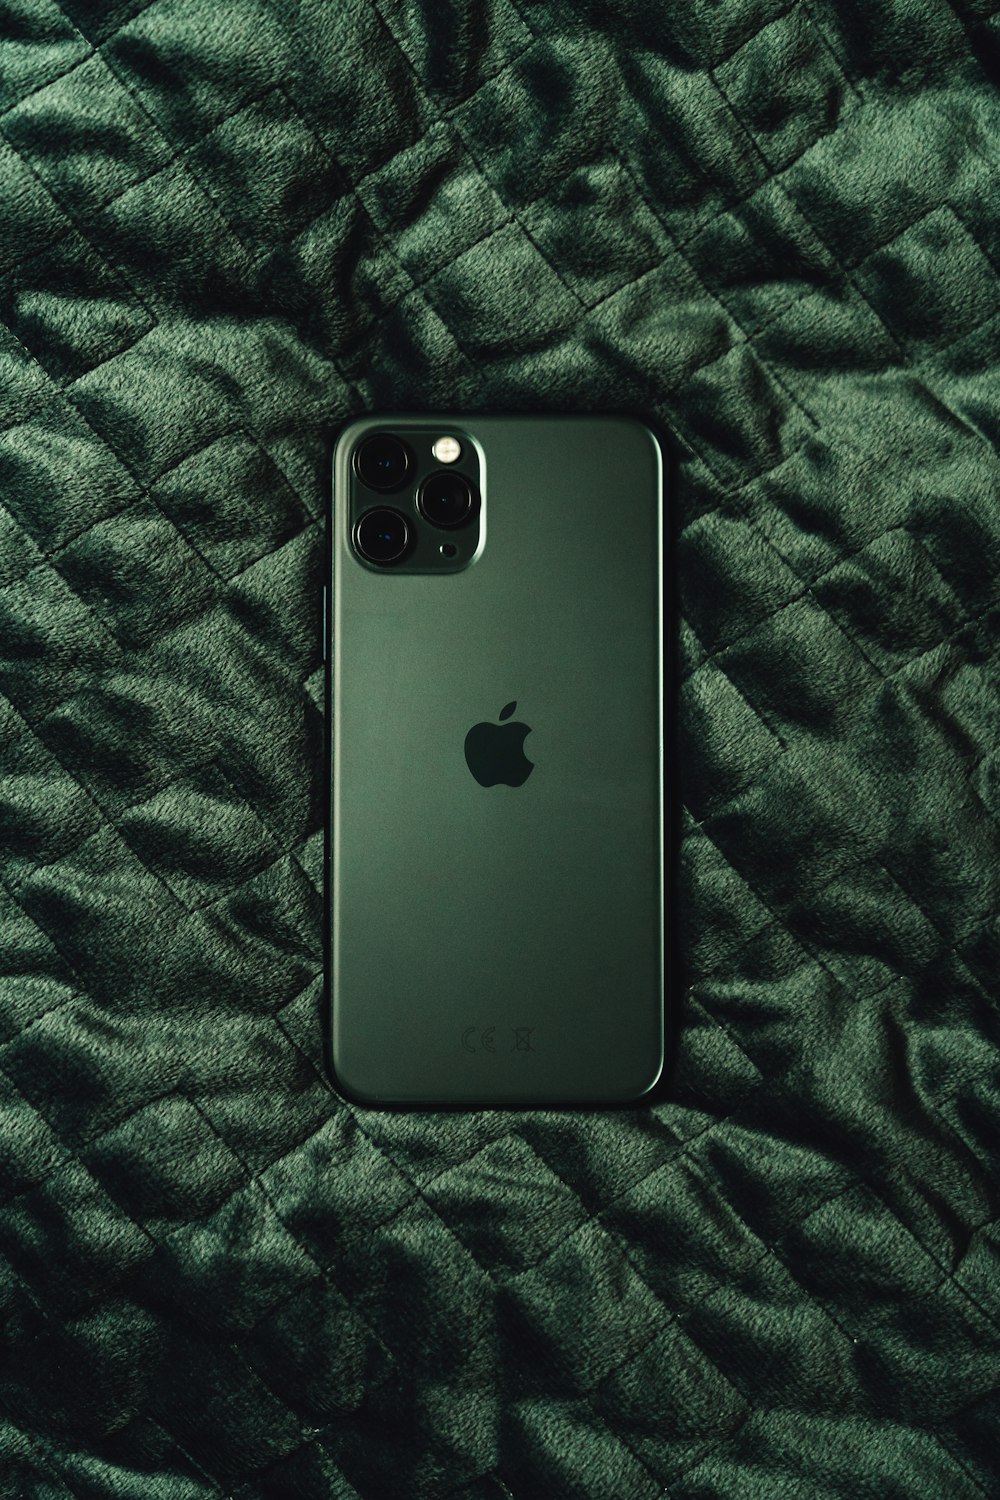 Apple Iphone 11 Pro Pictures | Download Free Images on Unsplash